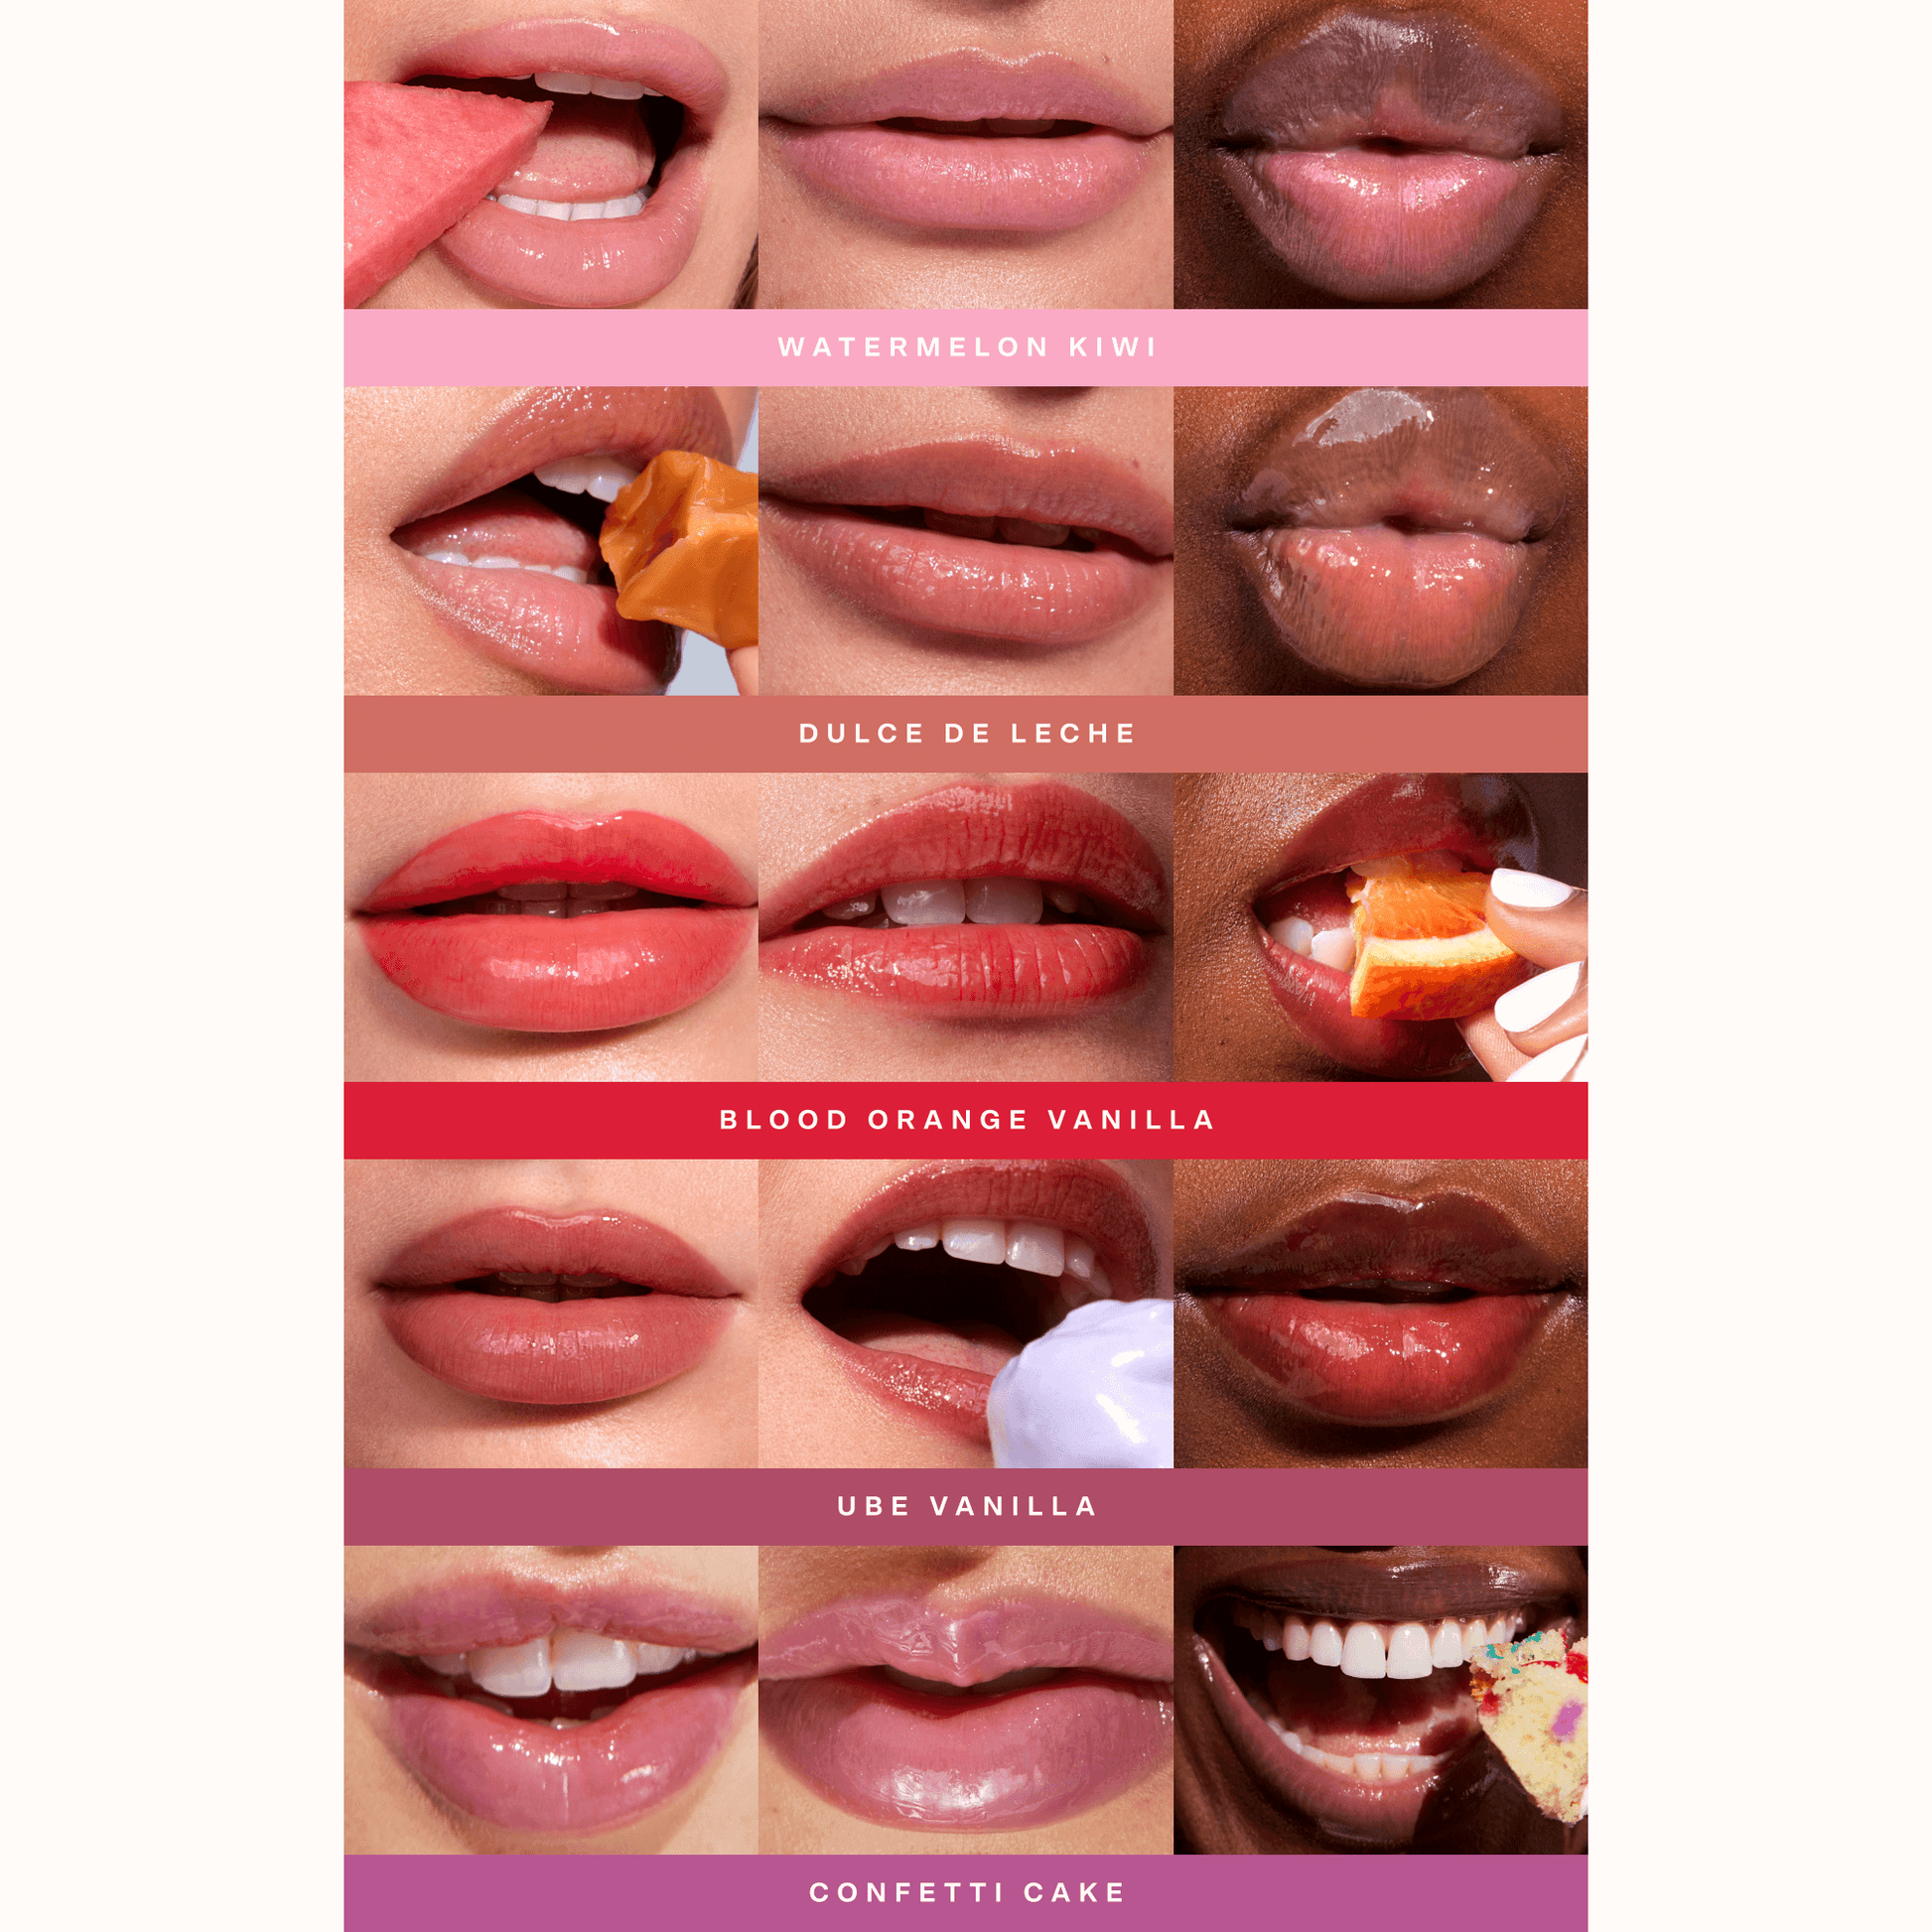 [Shared: Tinted shades of the Tower 28 Beauty LipSoftie™ Lip Treatment applied on three different skin tones